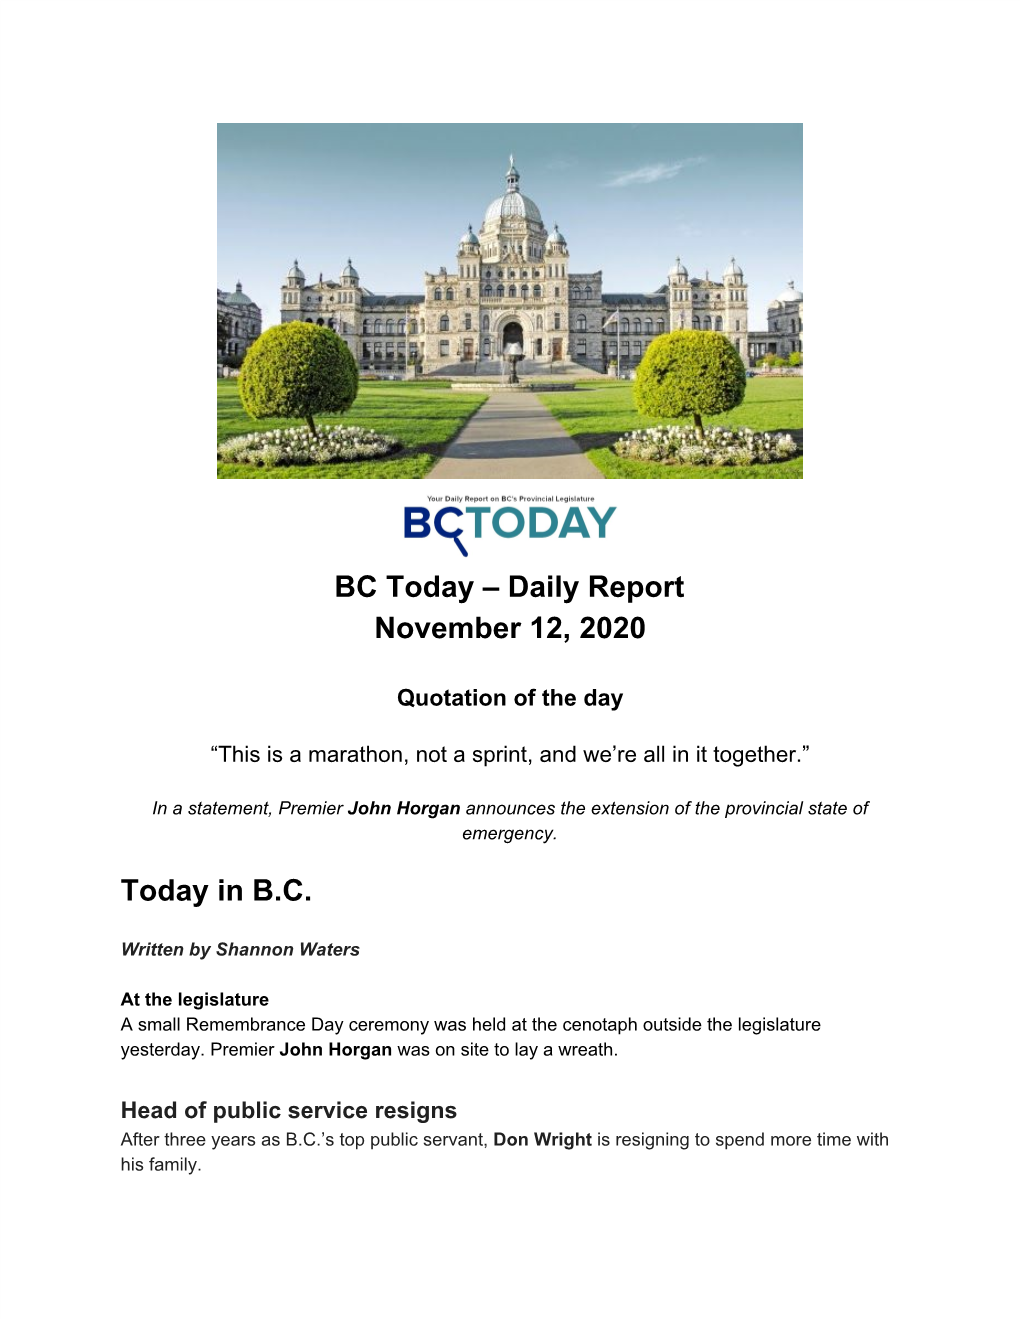 BC Today – Daily Report November 12, 2020 Today